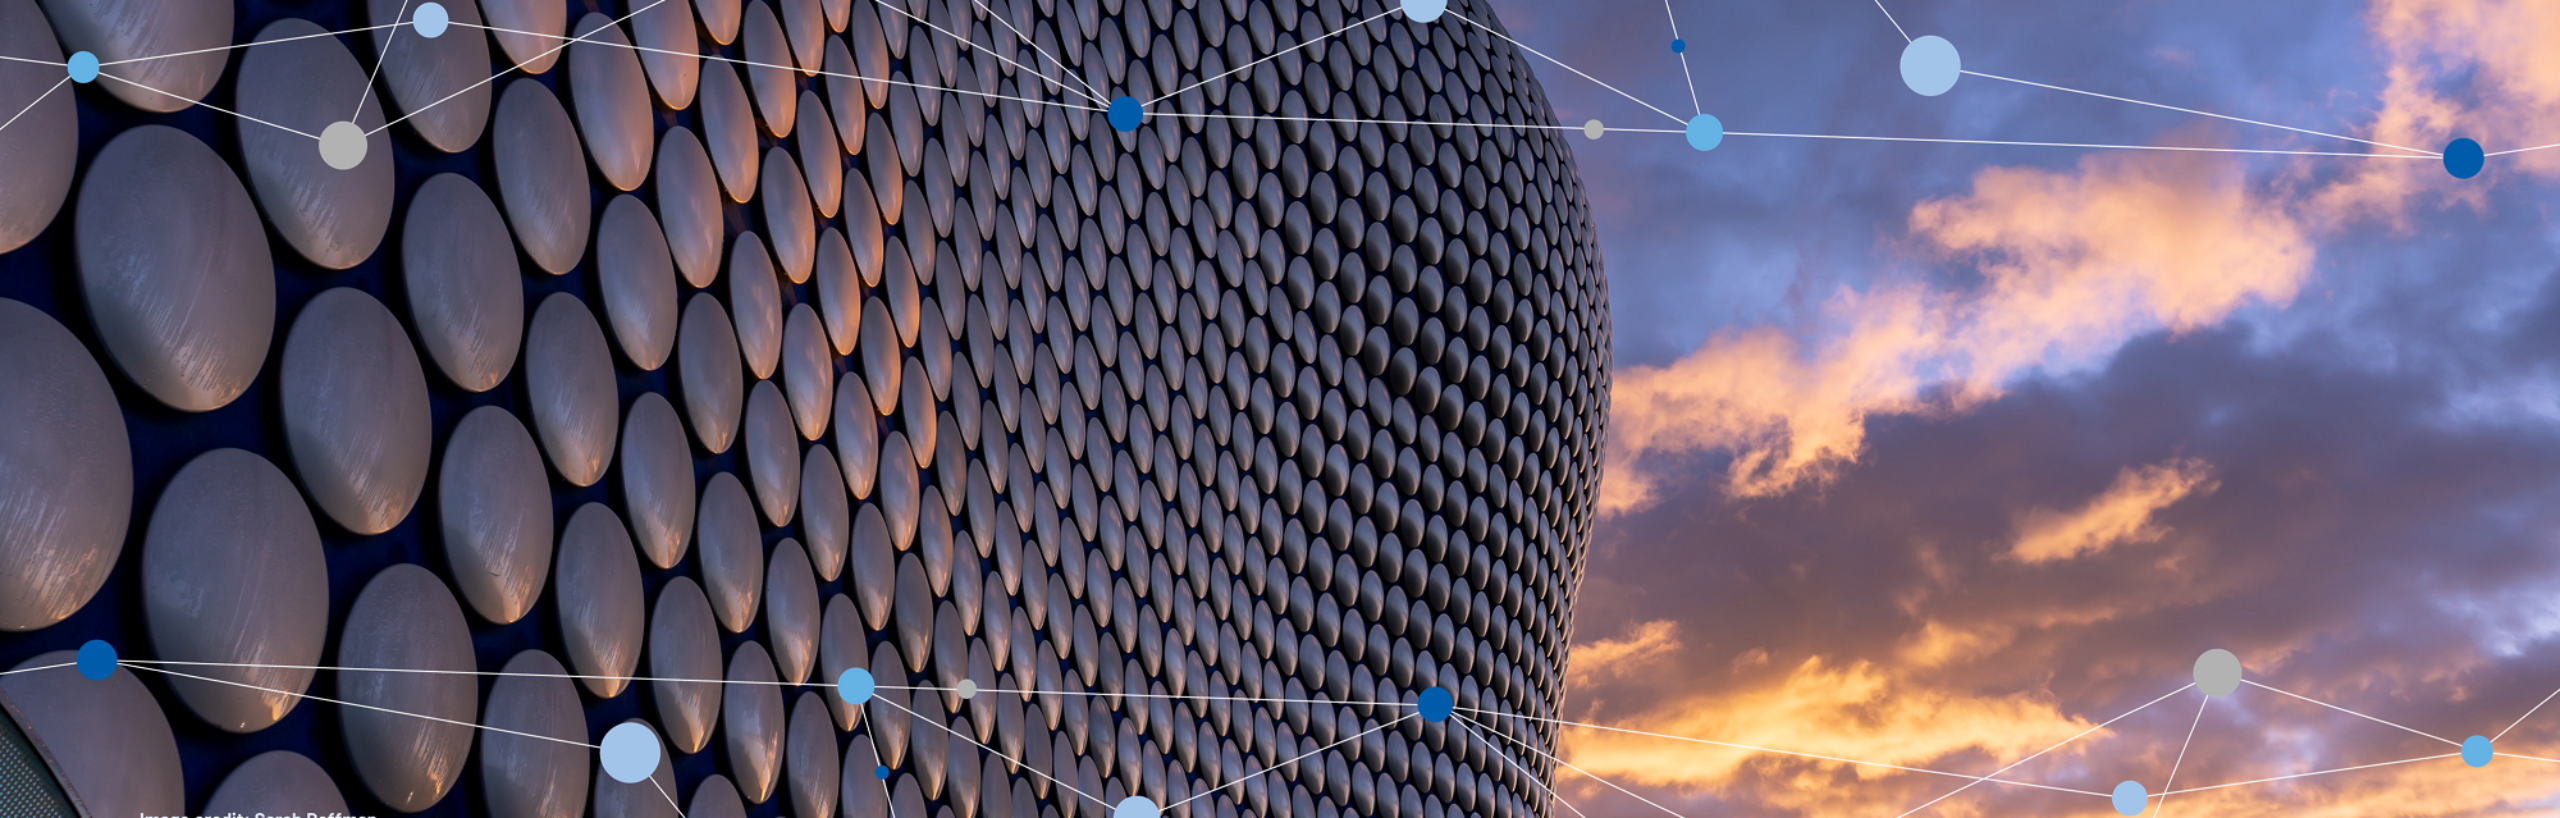 Birmingham Selfridge's building against a sunset sky with graphical elements over the top - Digis Squared sponsors UK 5G Showcase 2022